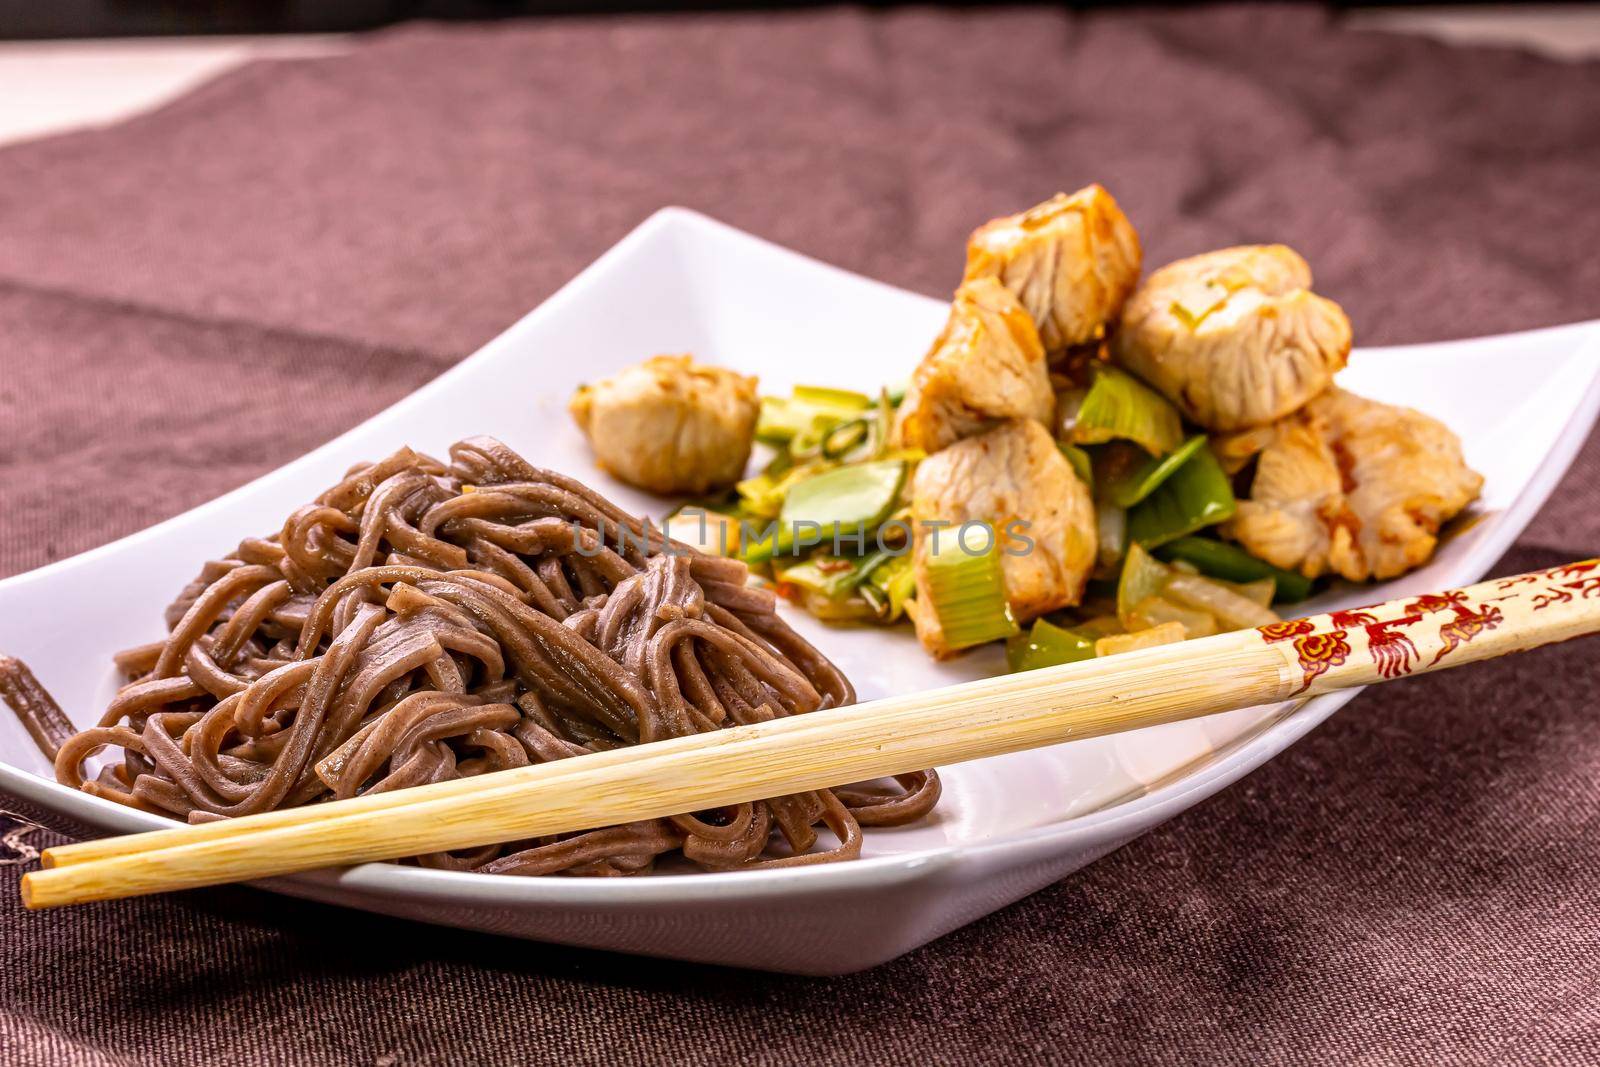 Japanese buckwheat noodles Yakisoba with chicken and vegetables on a light background.